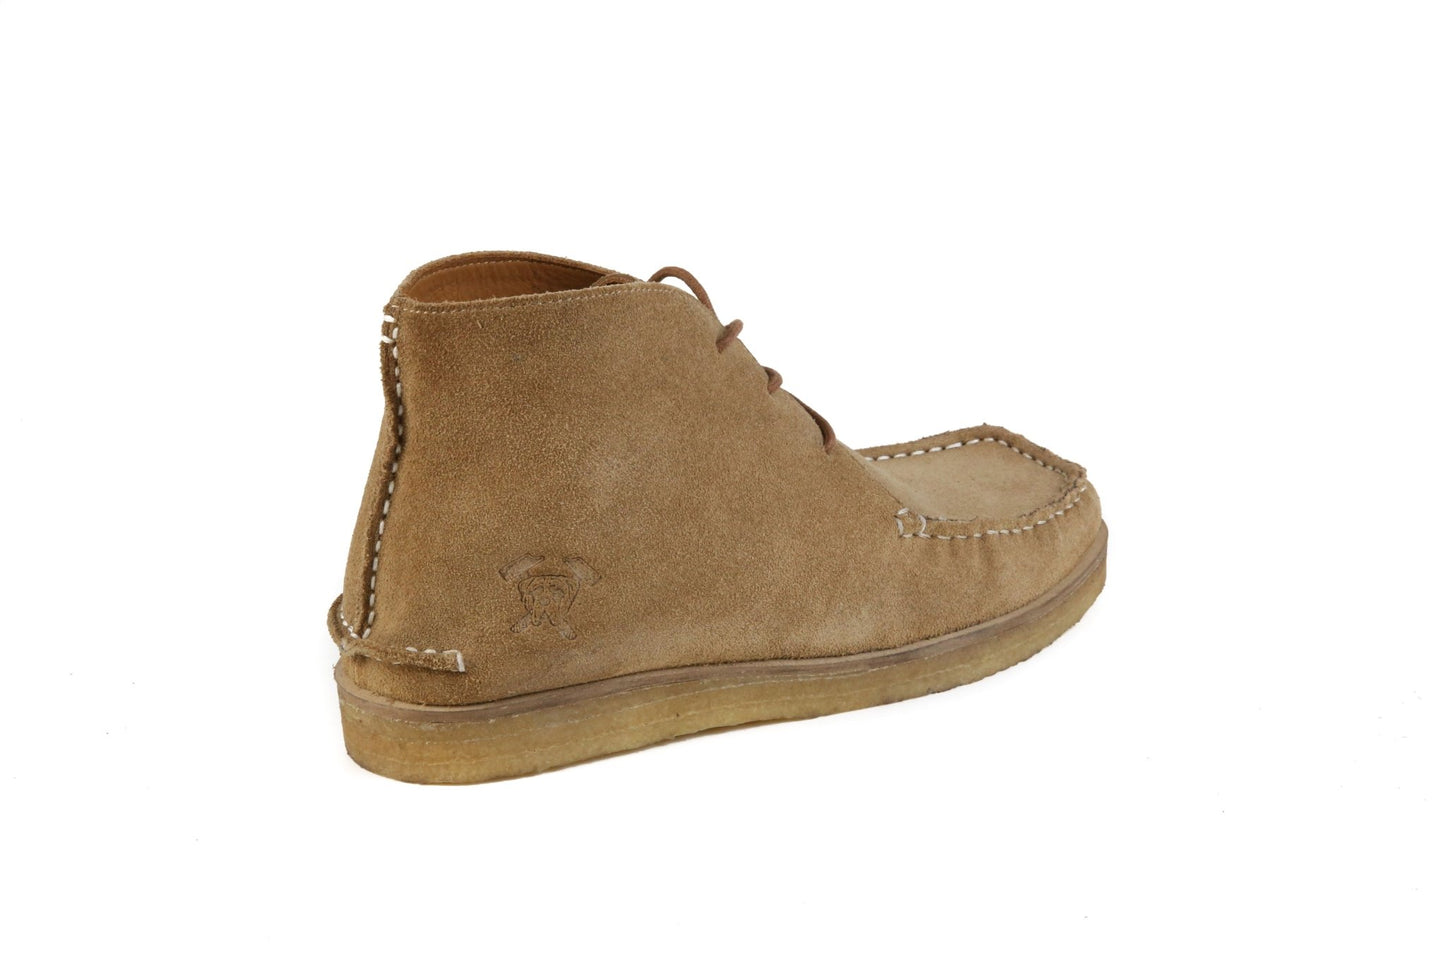 Hound & Hammer The Wallace | Sand Ankle Boots for Men - Men - Footwear - Boots - Ankle Boots - Benn~Burry